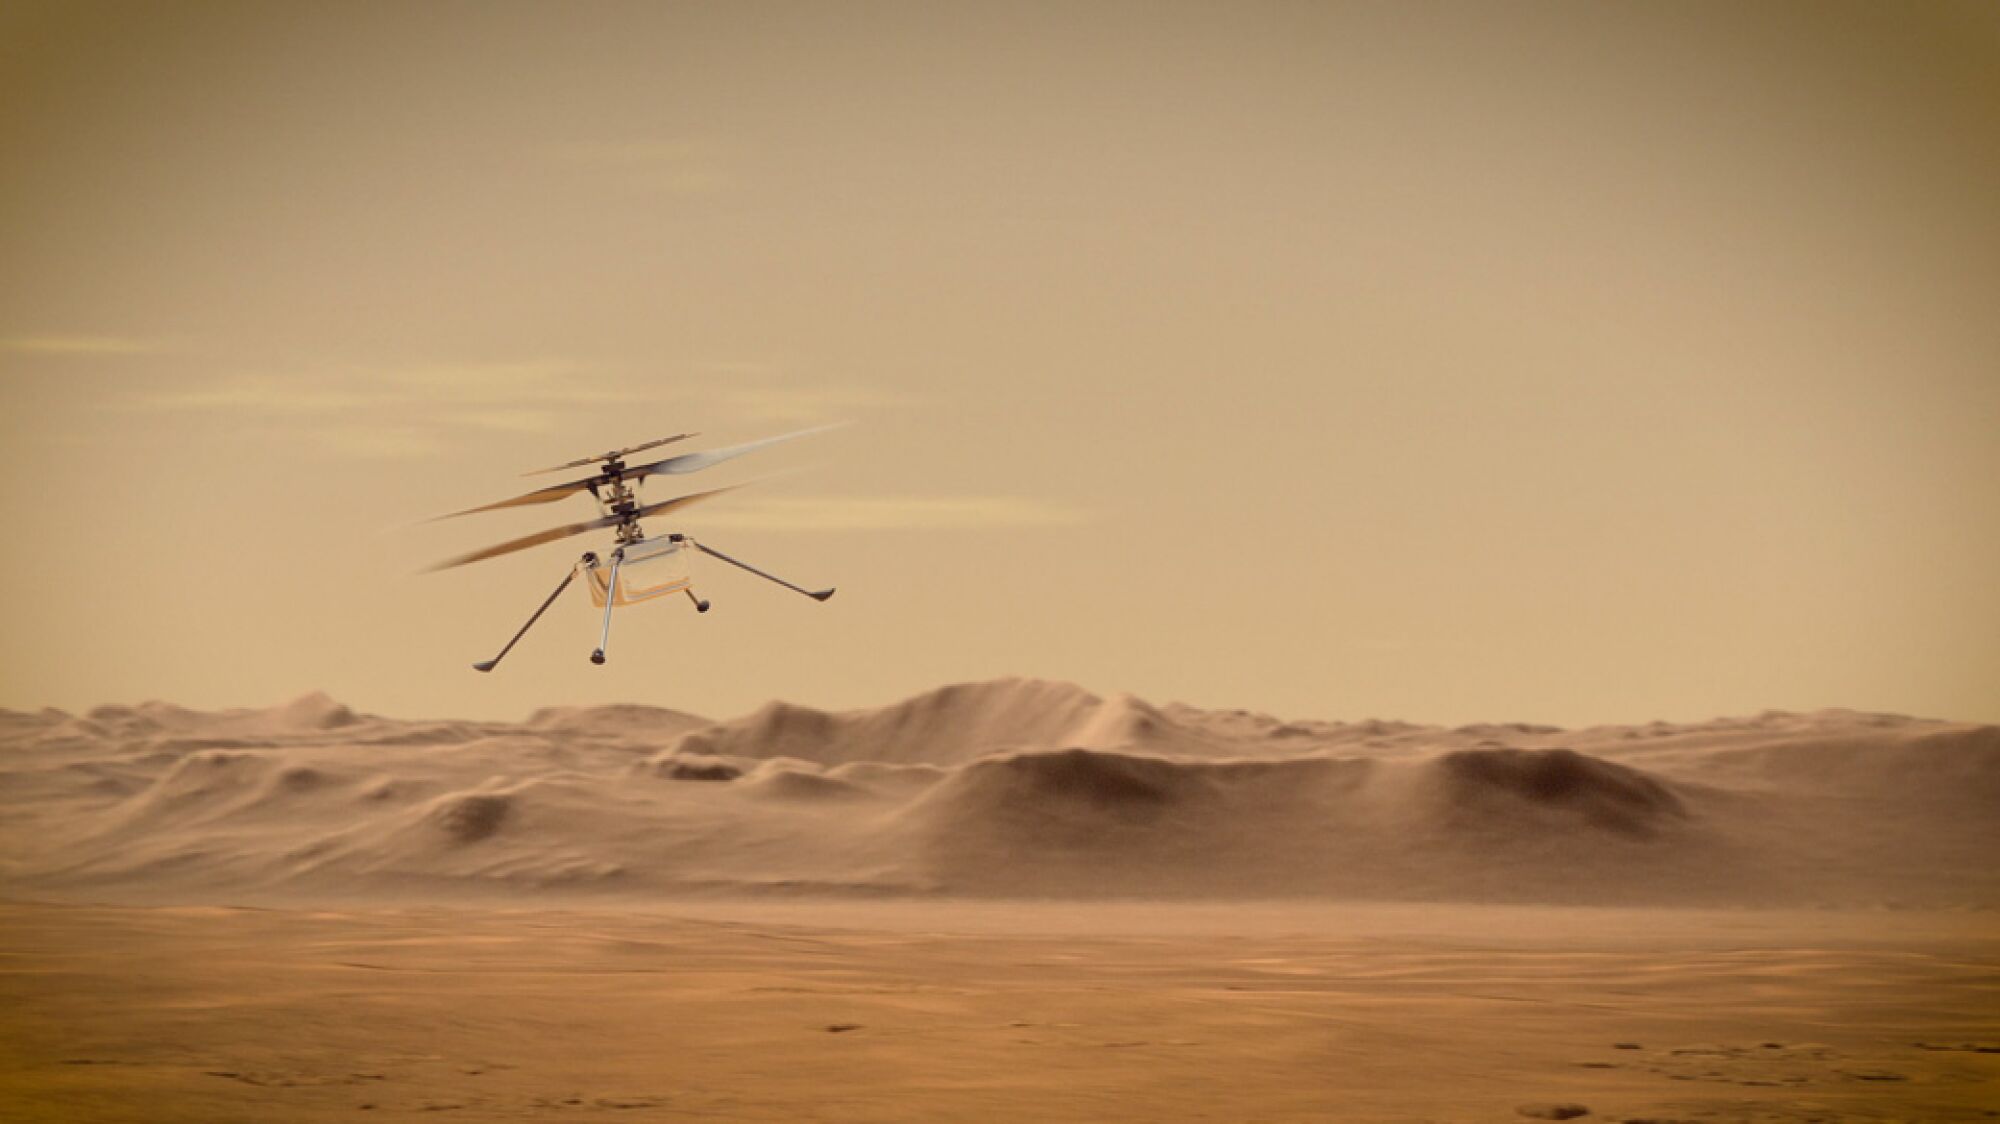 Perseverance will test fly a 4-pound helicopter from Jezero Crater on Mars.